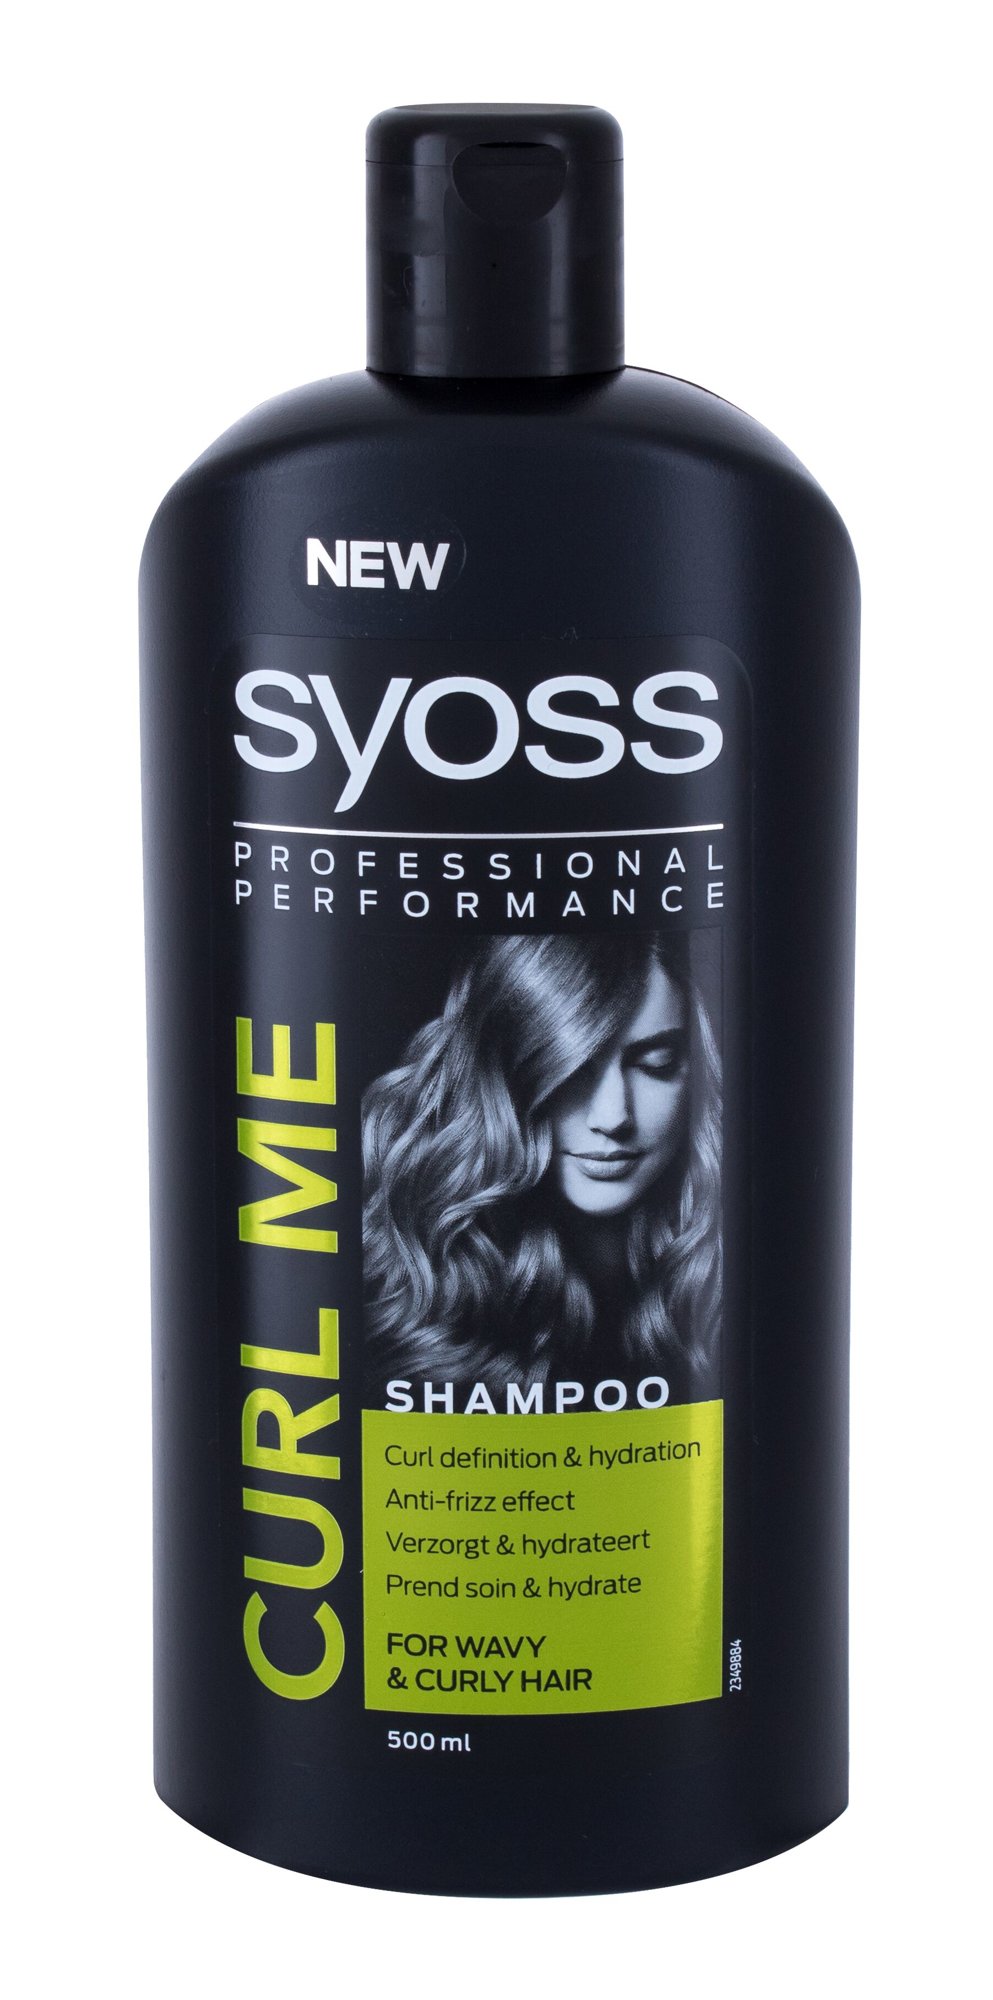 Syoss Professional Performance Curl Me